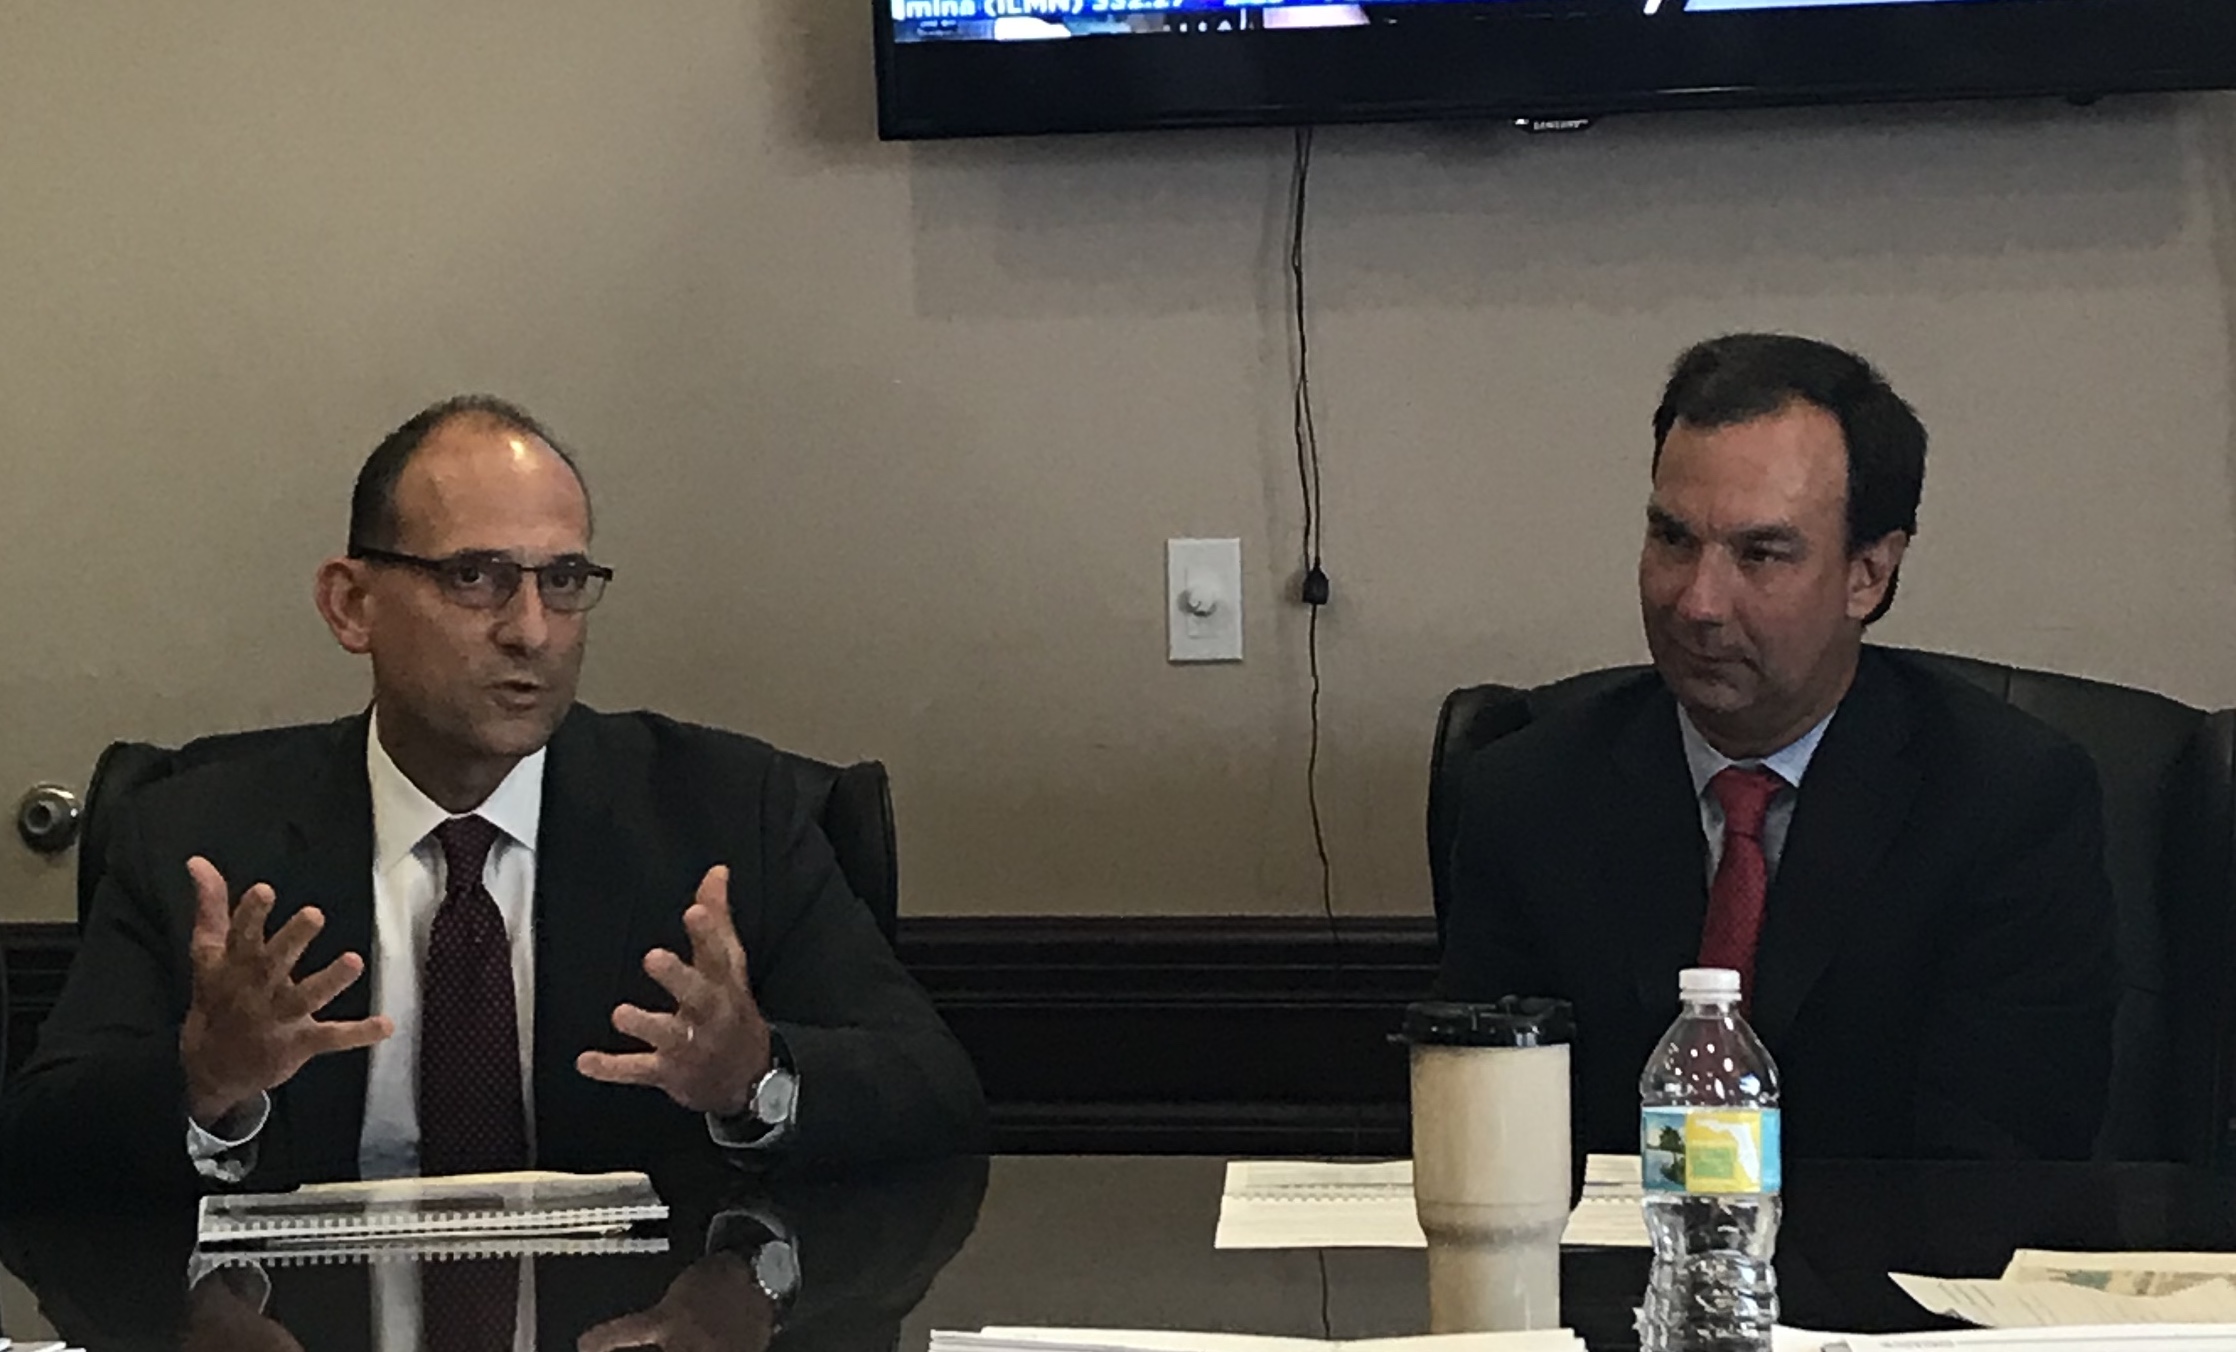 The Board of Trustees received formal presentations for Leveraged Loans. Representatives from SEIX (pictured on July 20, 2018), Credit Suisse and Pacific Asset Management provided excellent options for the Board to consider.